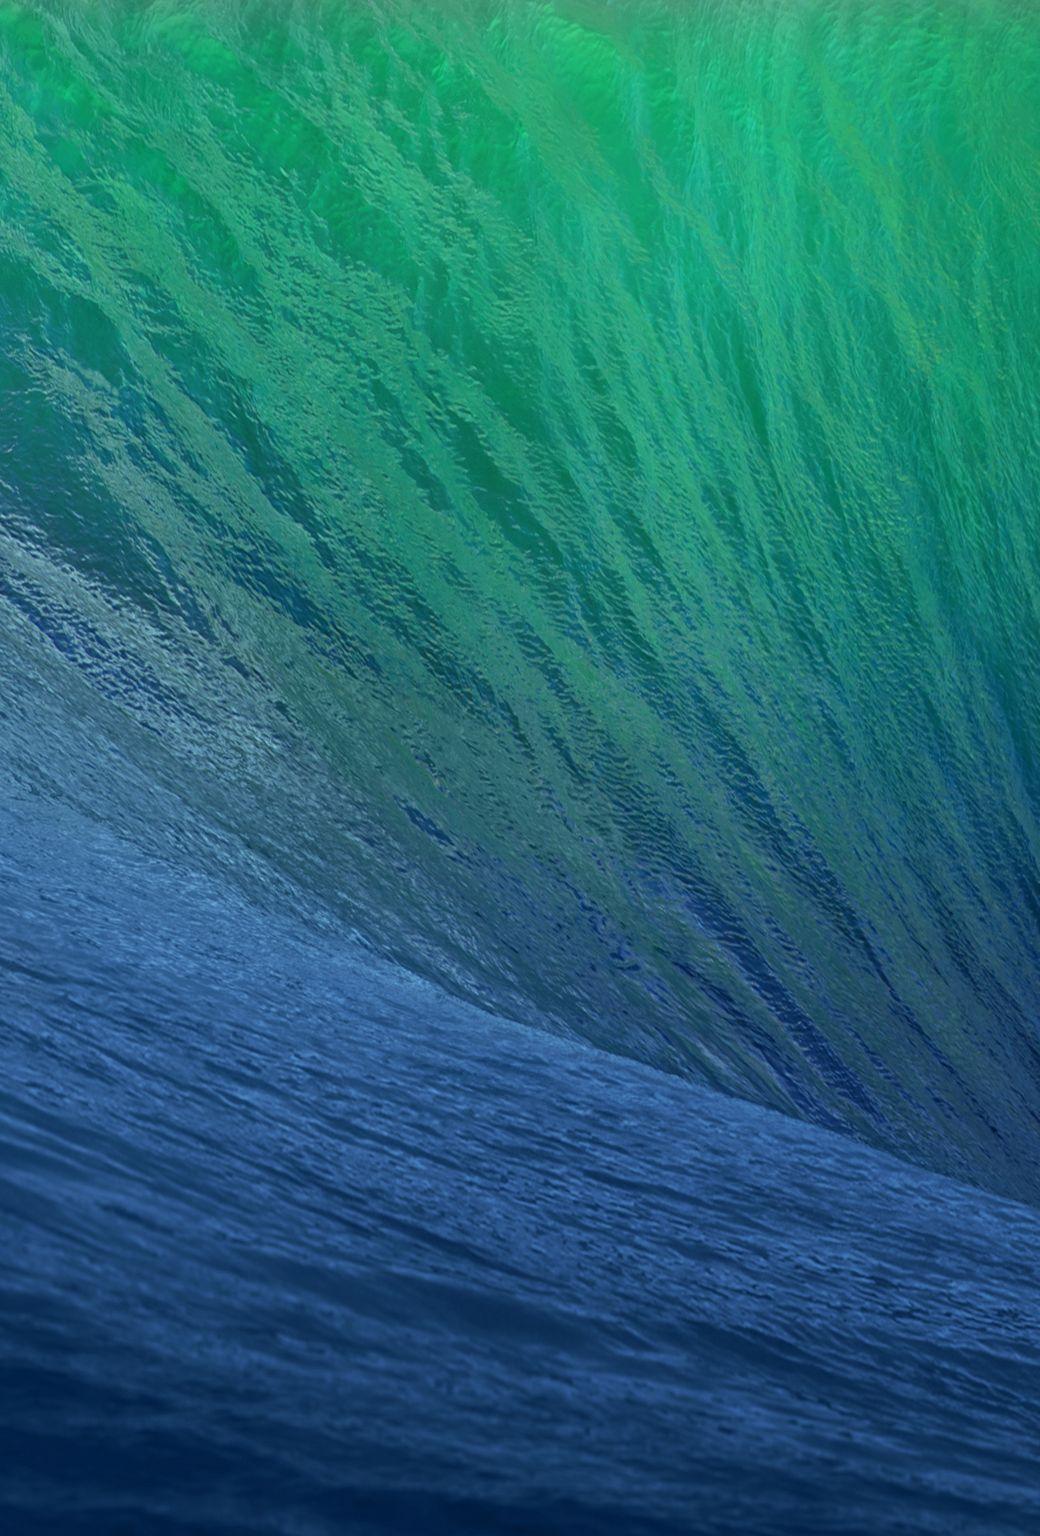 How to Get the Mavericks and iPad Air Wallpaper for Your Own Devices